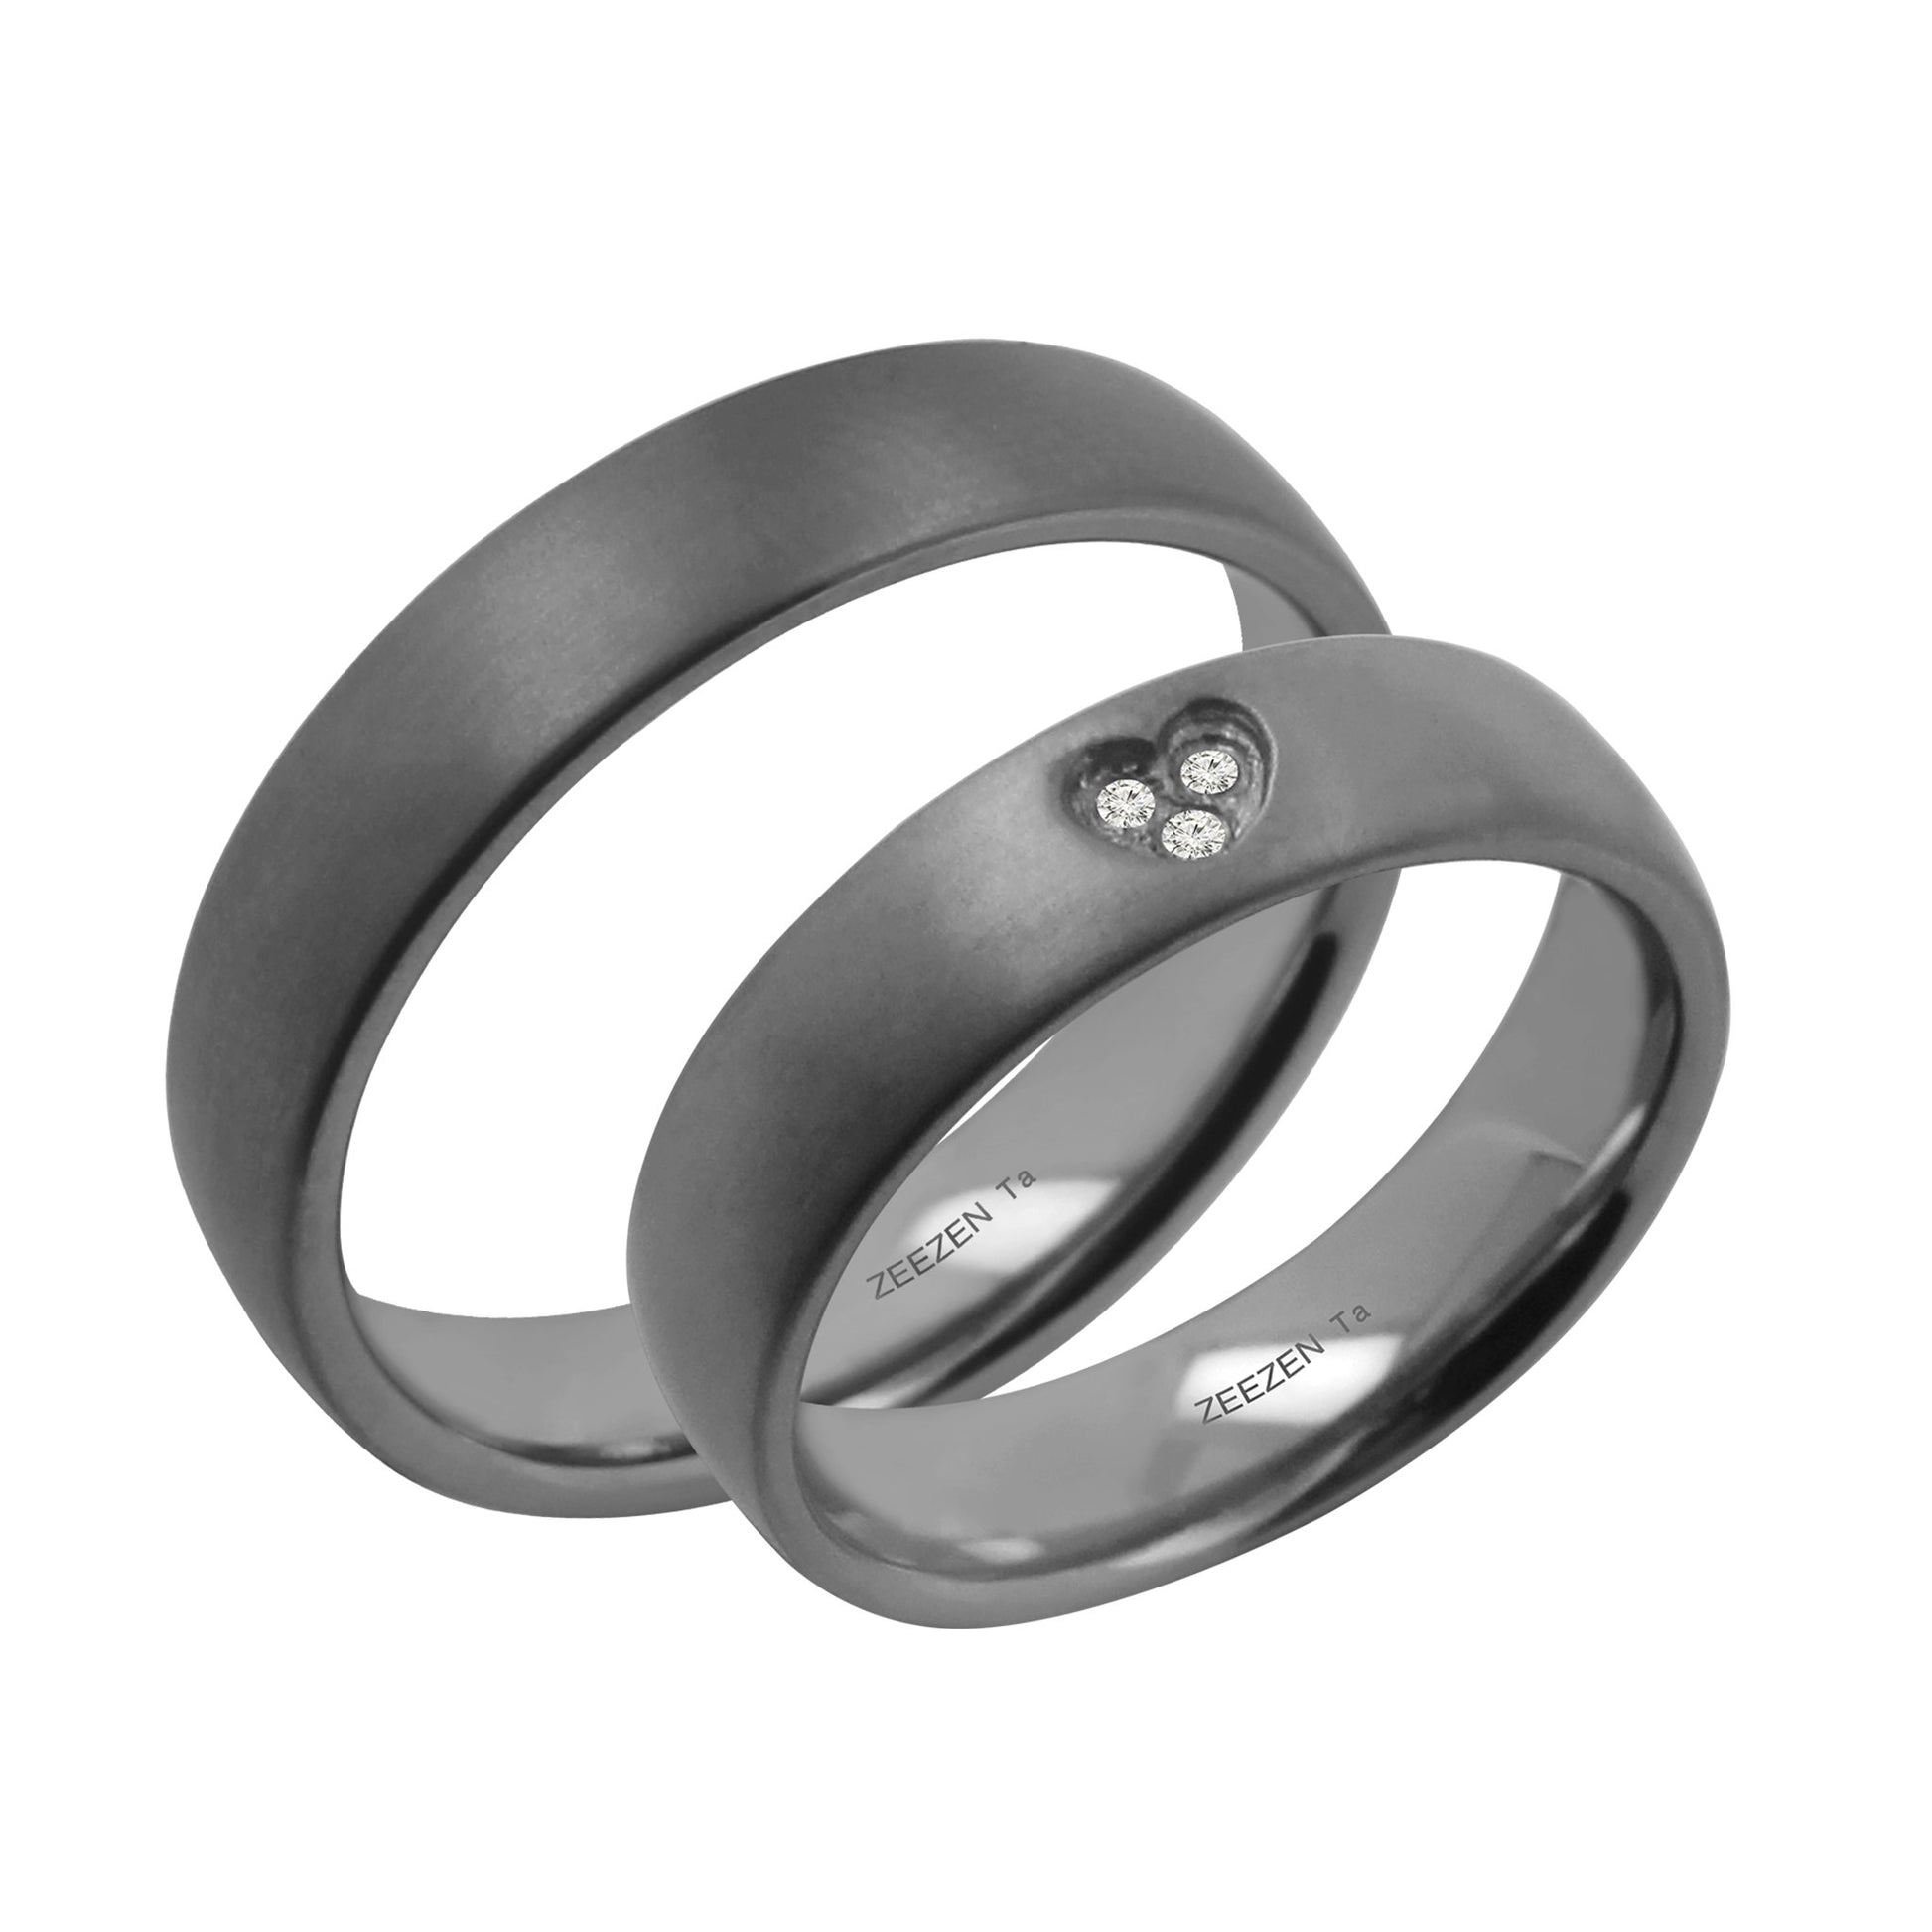 Tantalum Ring w/o min. Matte Ring profile: width: 5.0 mm || height: 1.8 mm. Matt tantalum ring. Next to a matching couple ring that has a heart shaped hole in the center with three lab grown diamonds in it.